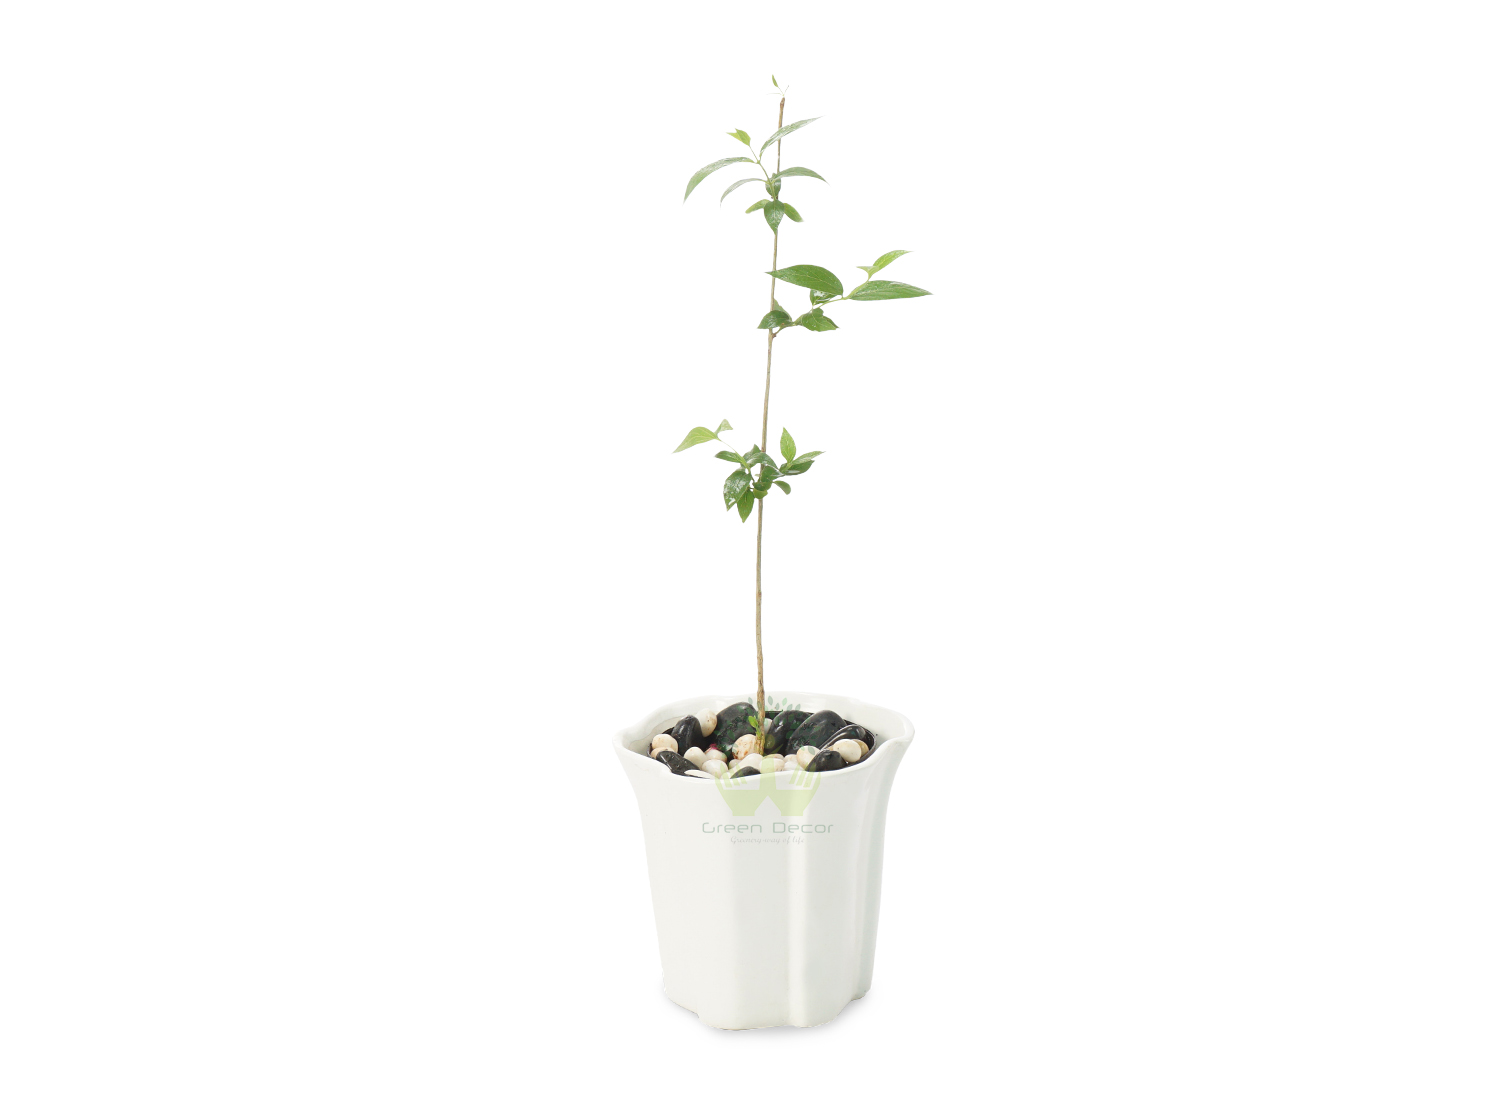 Buy Harshringar Plants Front View , White Pots and seeds in Delhi NCR by the best online nursery shop Greendecor.